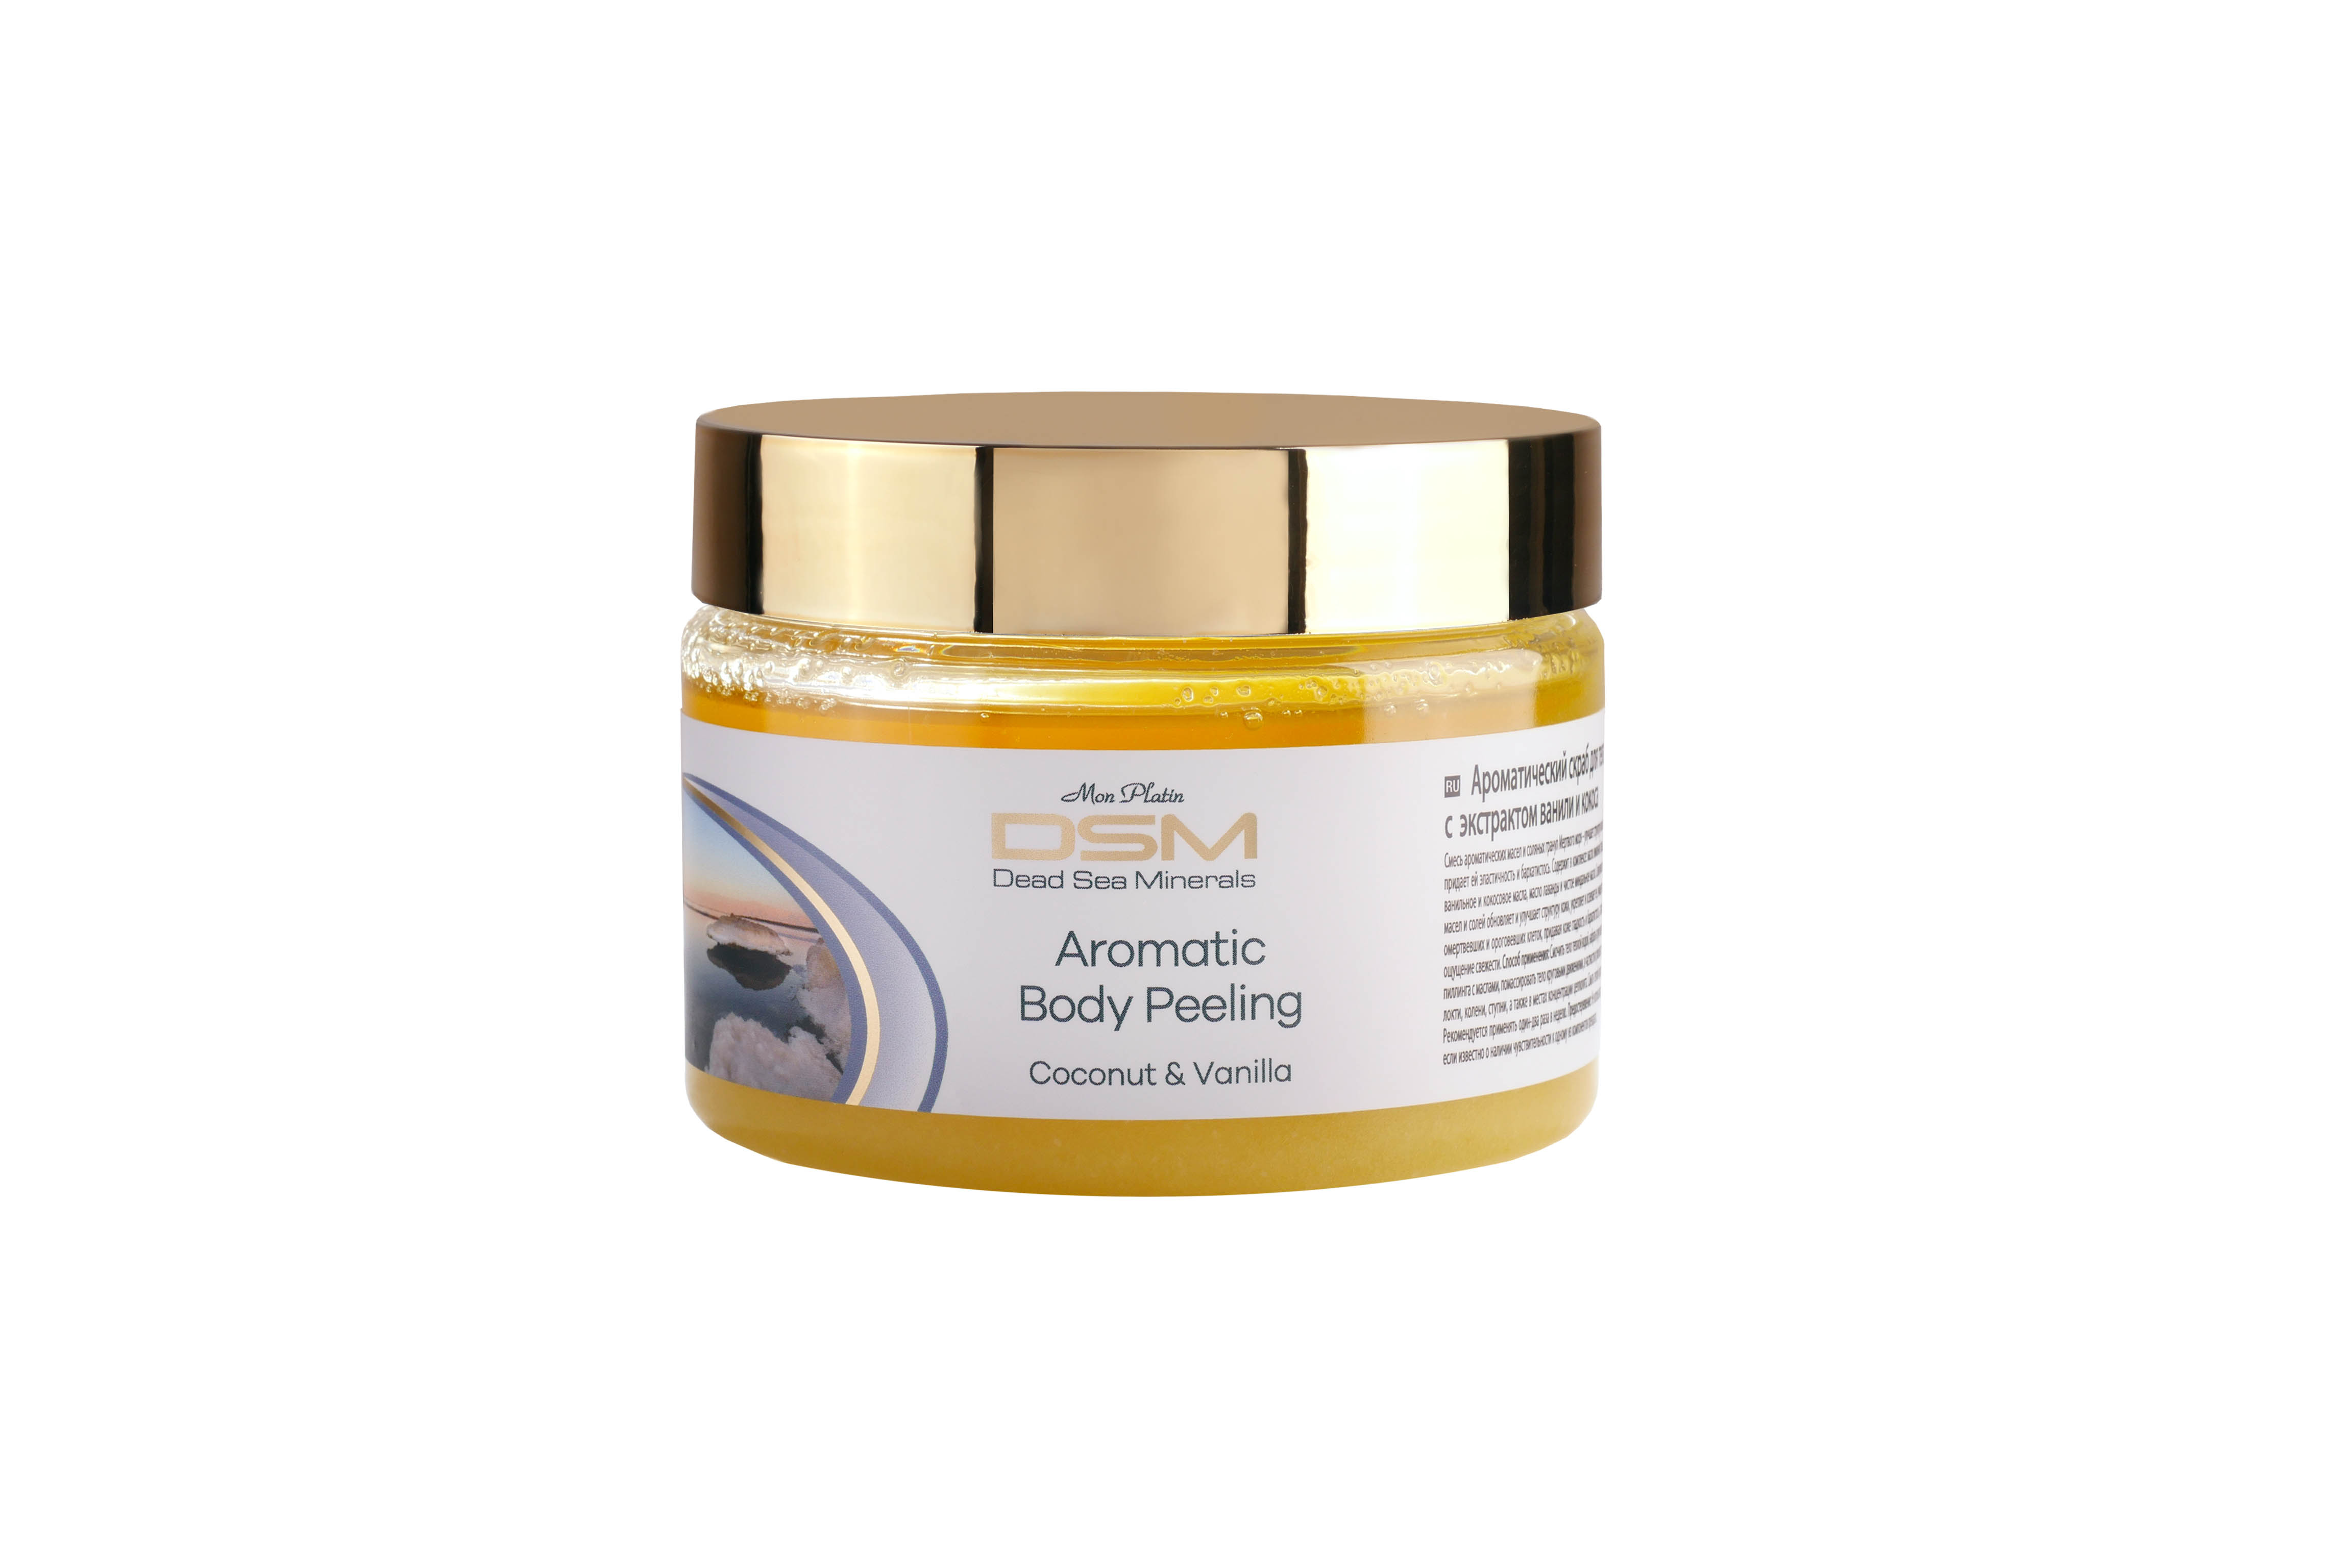 Aromatic Body Peeling scented with fine tropic odor of Coconut and Vanilla